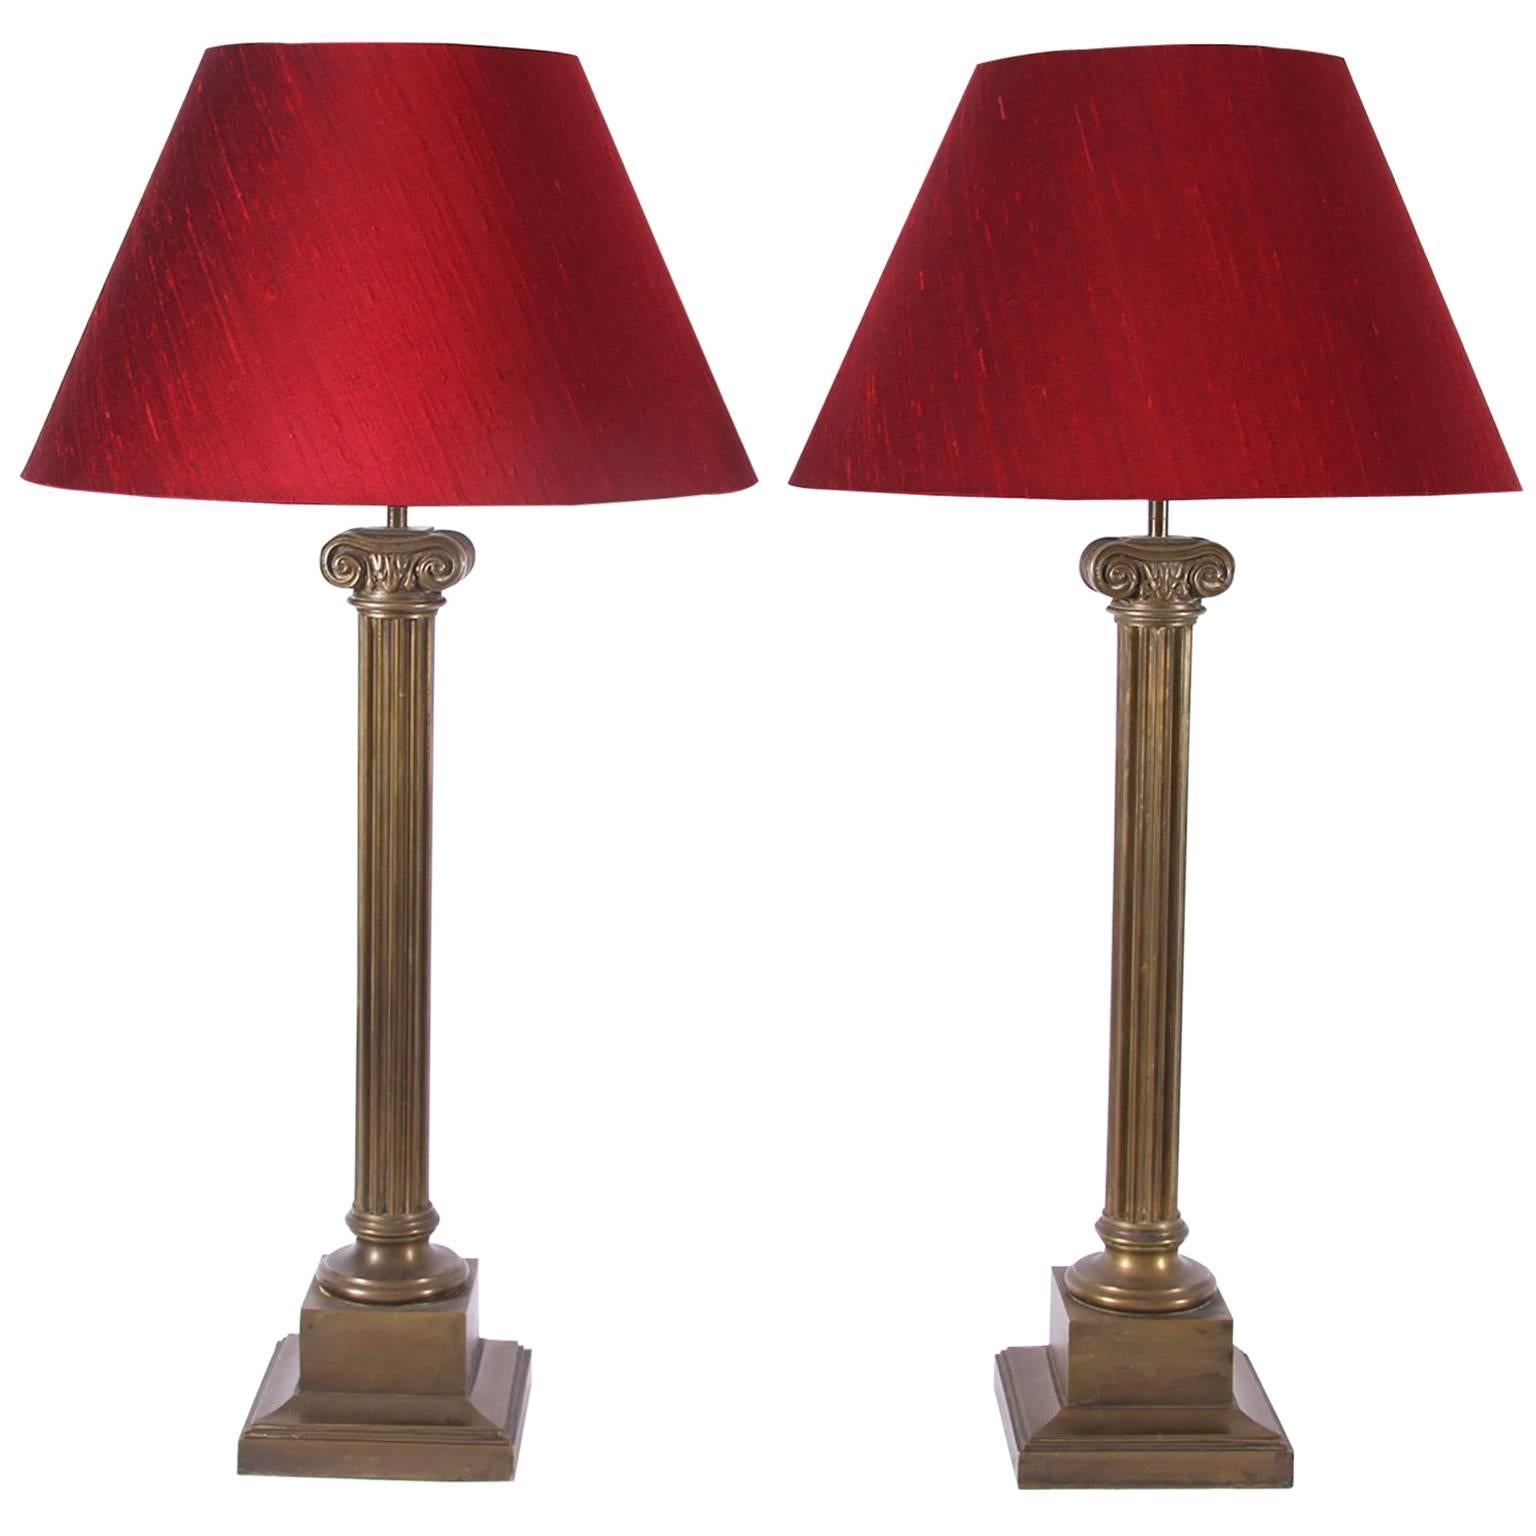 Pair of Column Table Lamps, French, Mid-20th Century